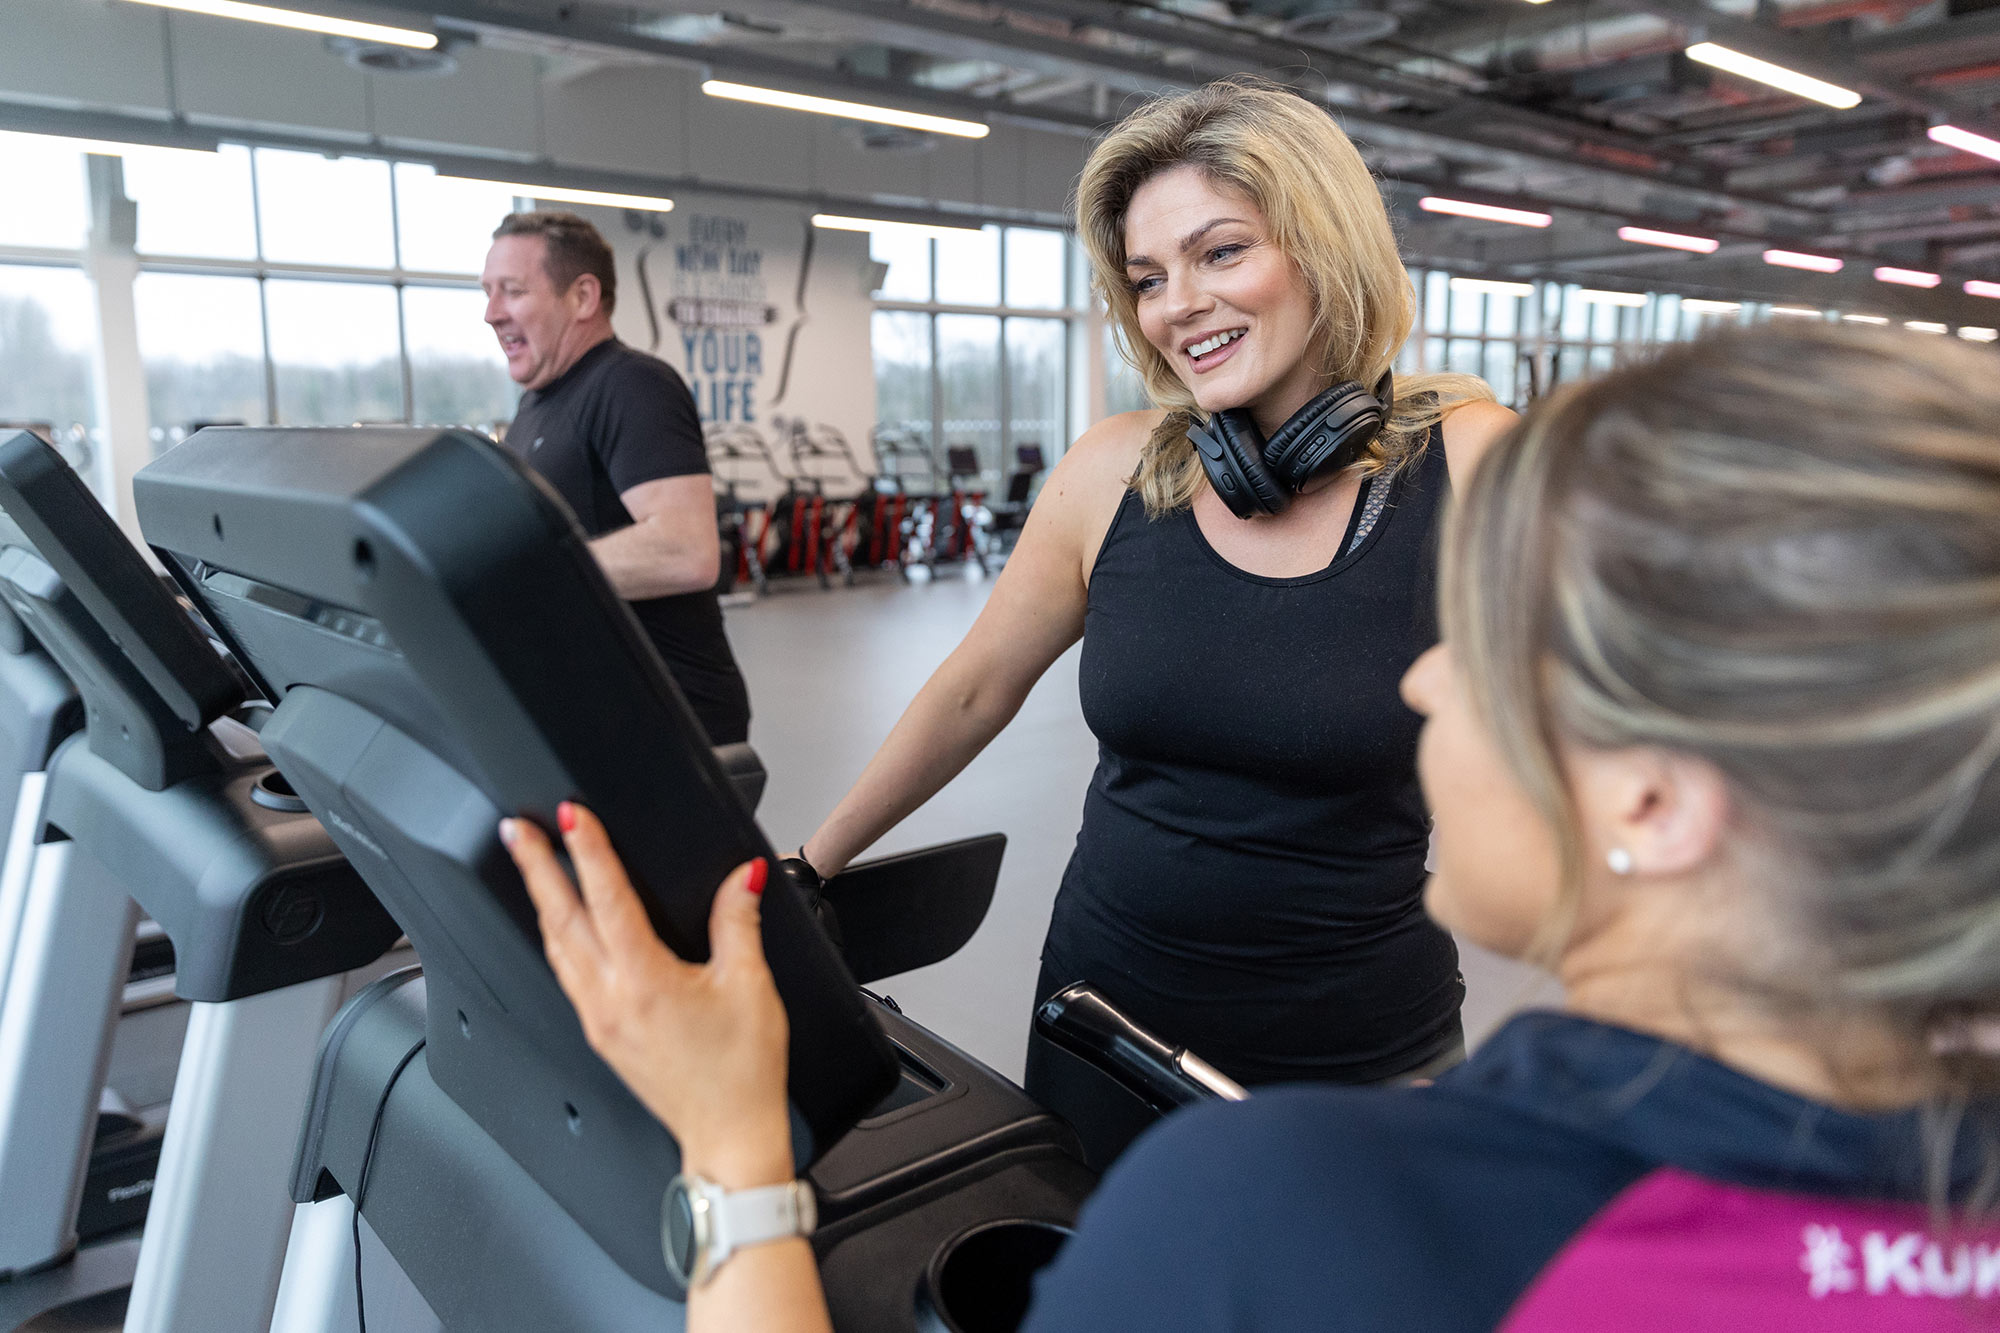 Gym goers on spin bikes